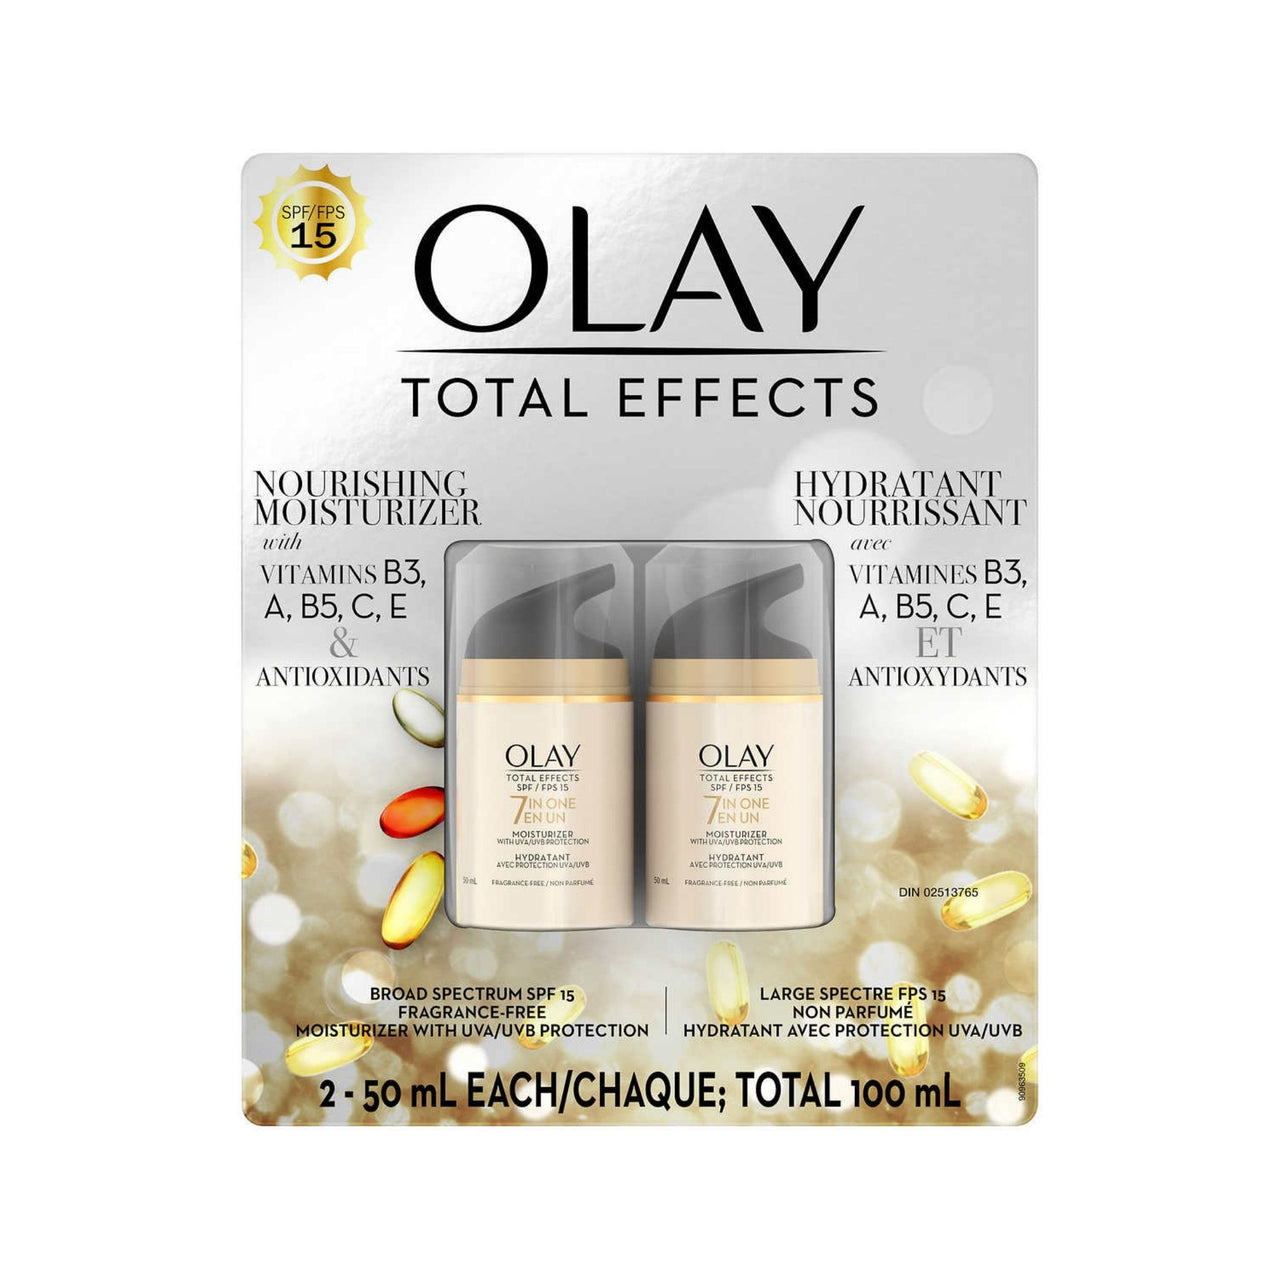 Image of Olay Total Effects Face Moisturizer SPF 15 2x50ml - 2 x 50 Grams